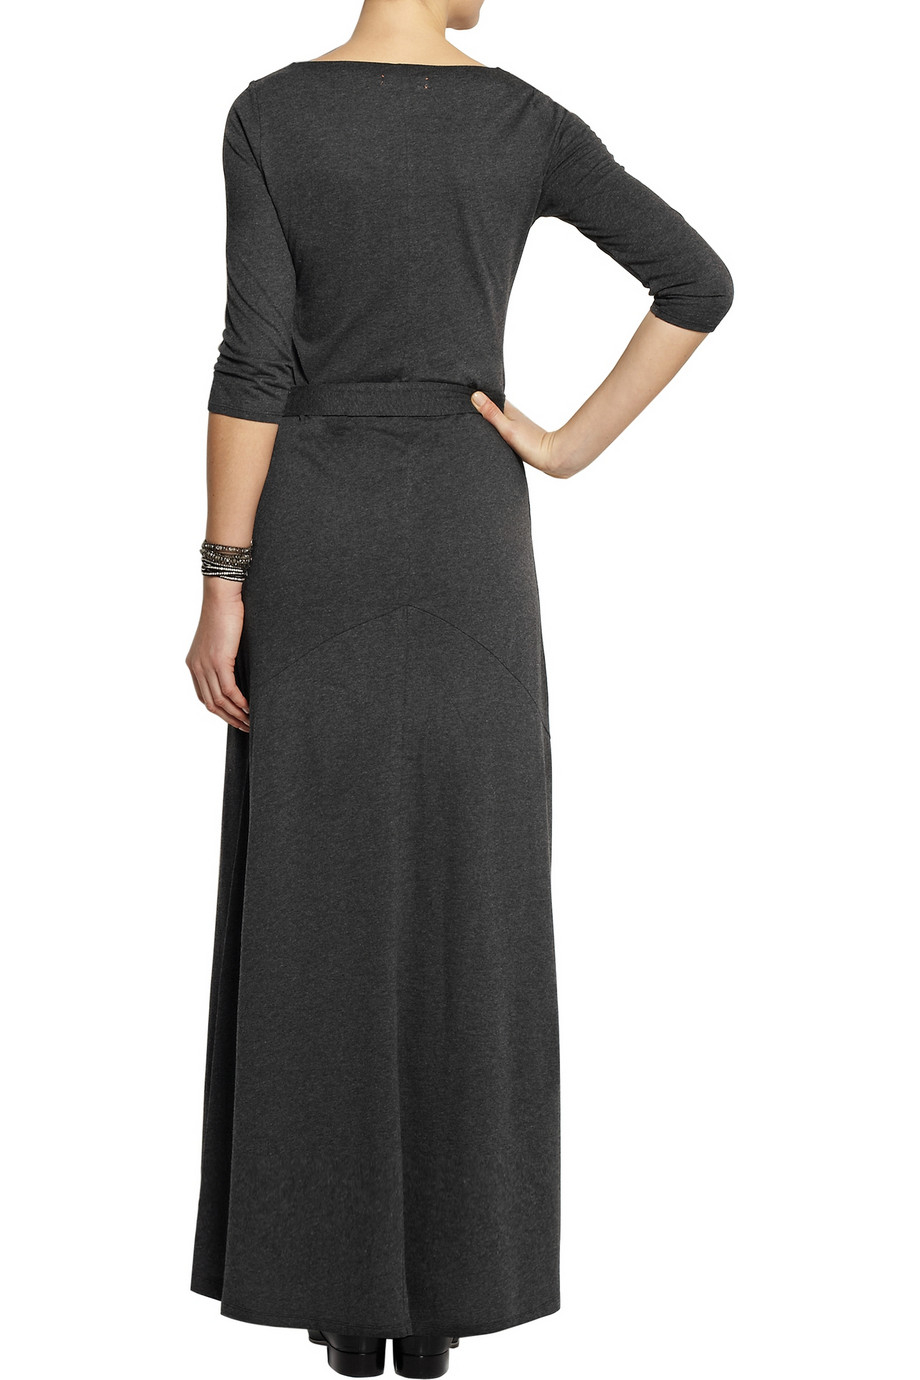 Chinti & parker Cotton And Modal-Blend Jersey Maxi Dress in Gray | Lyst